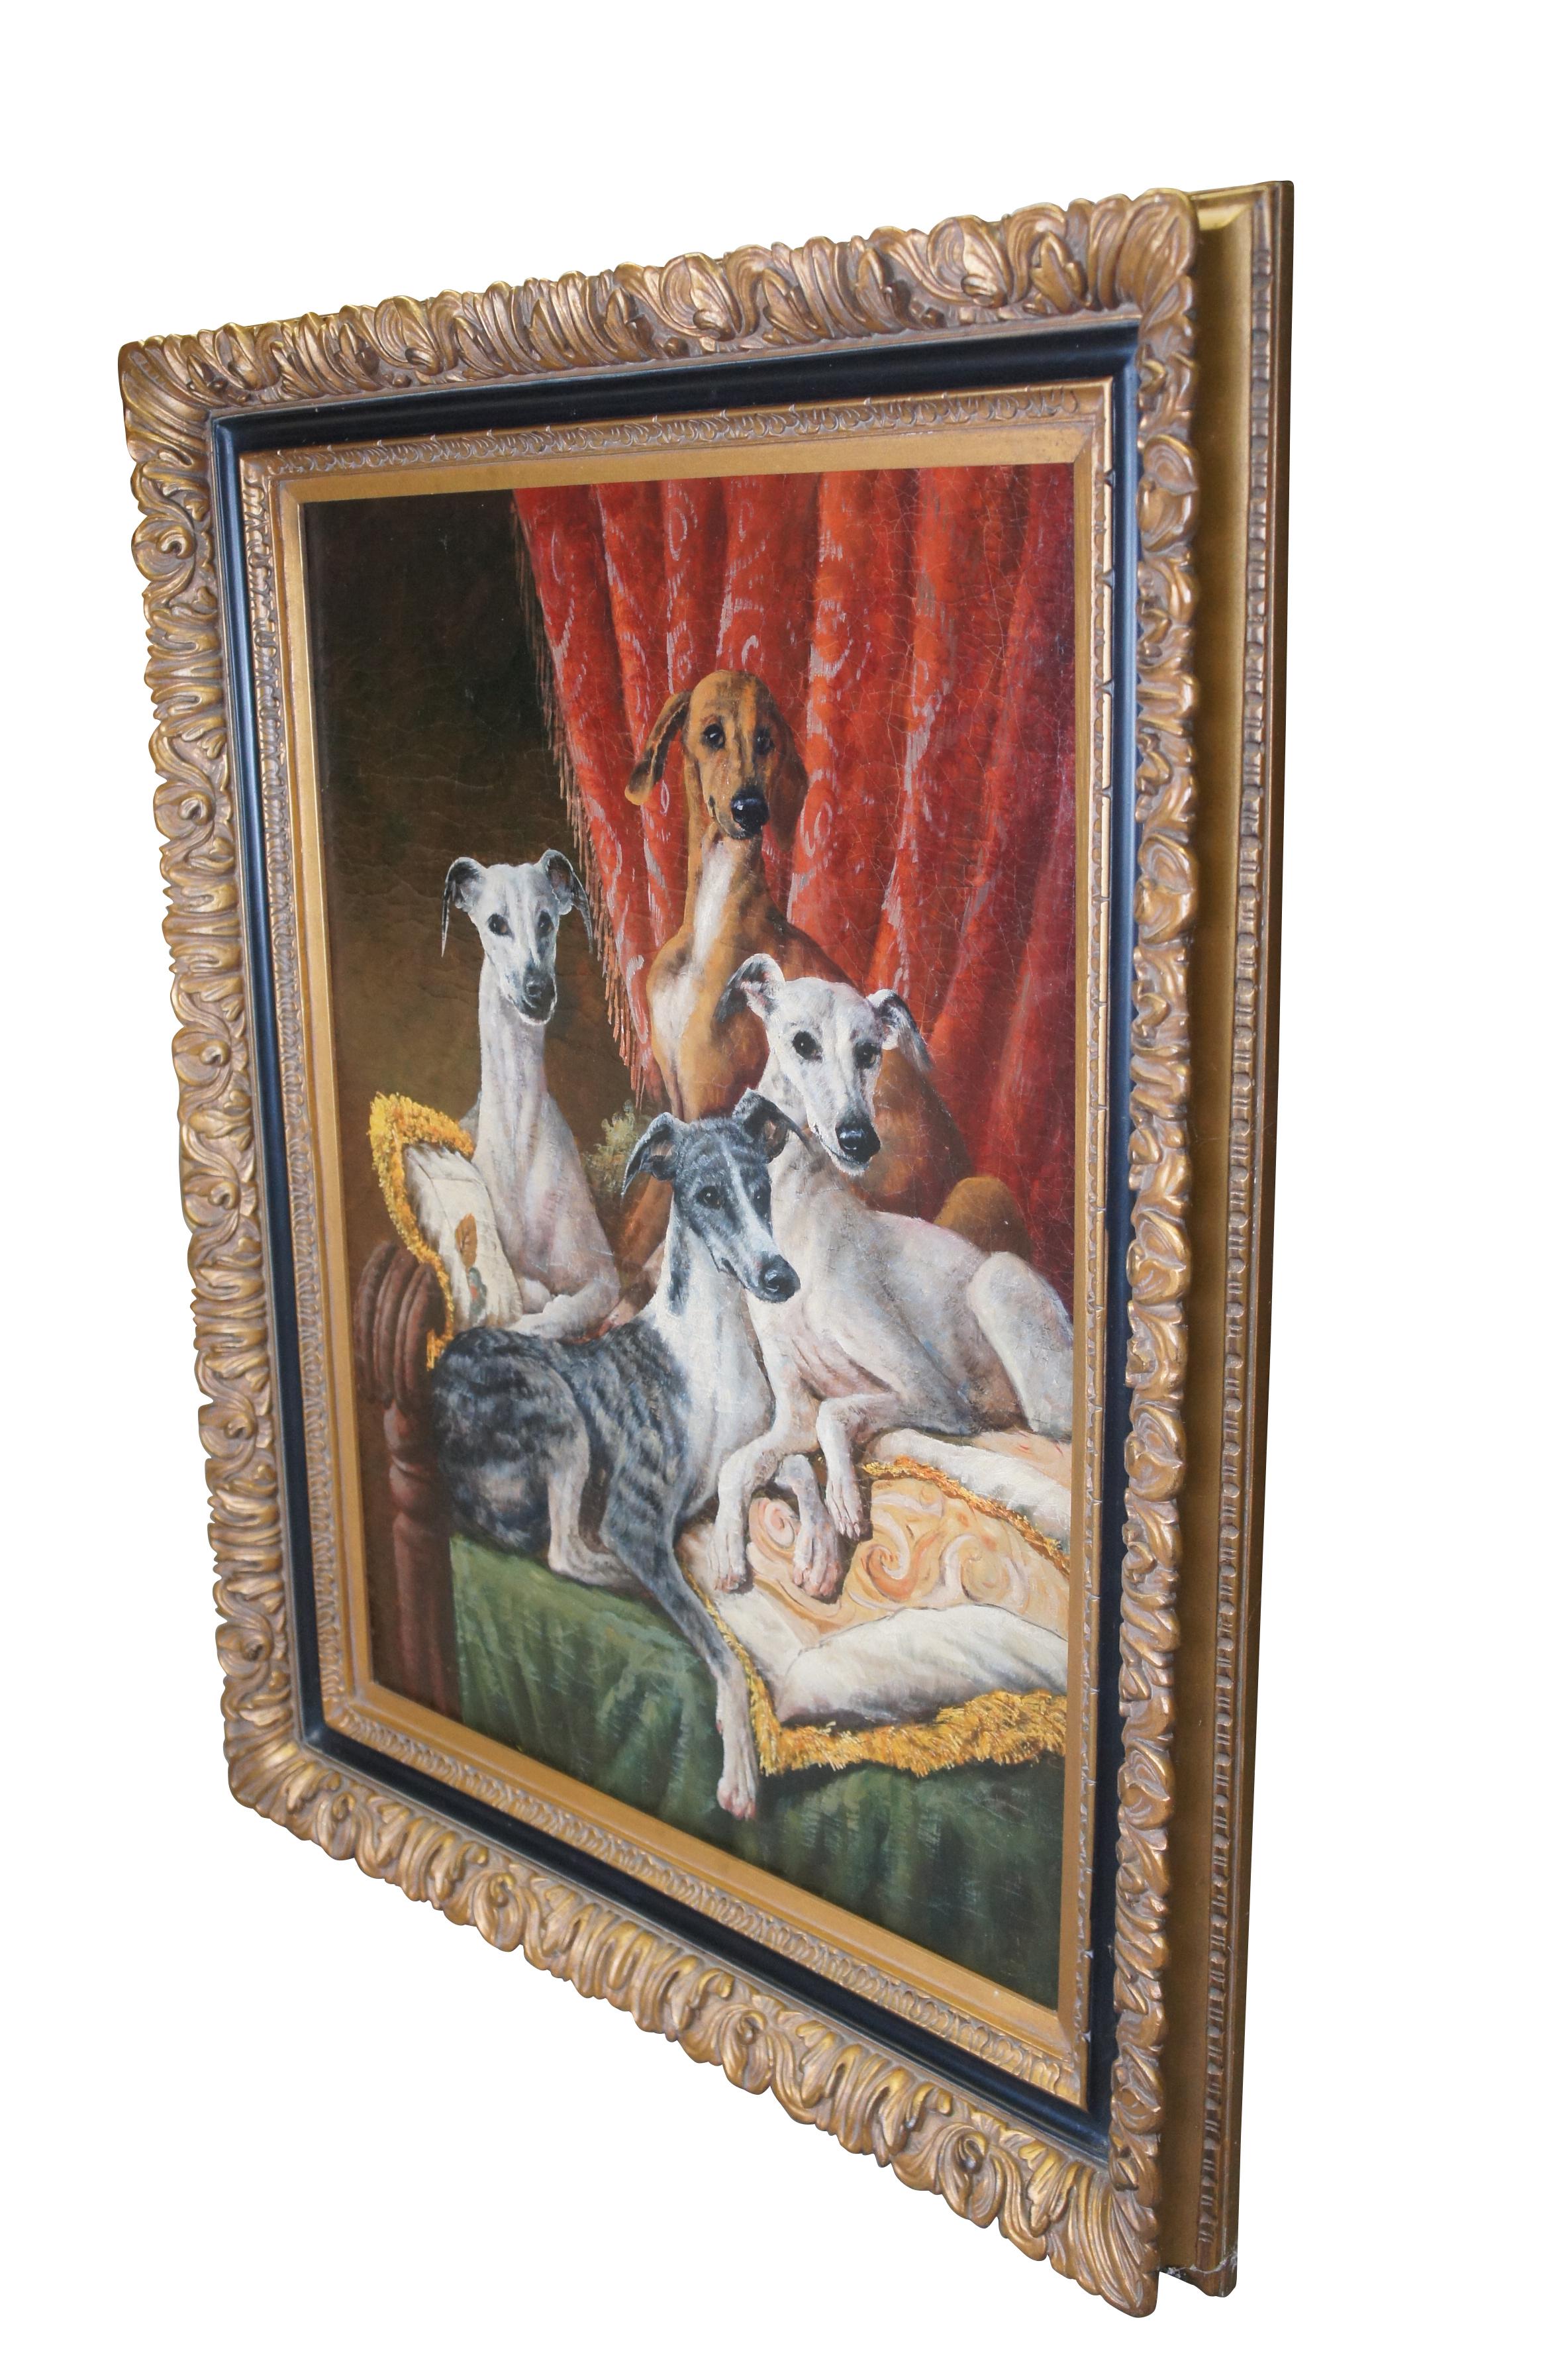 Large vintage oil painting on board depicting a family of four Whippet dogs on a daybed with pillows.  Framed in baroque gold floral acanthus and ebonized frame.

Dimensions:
45